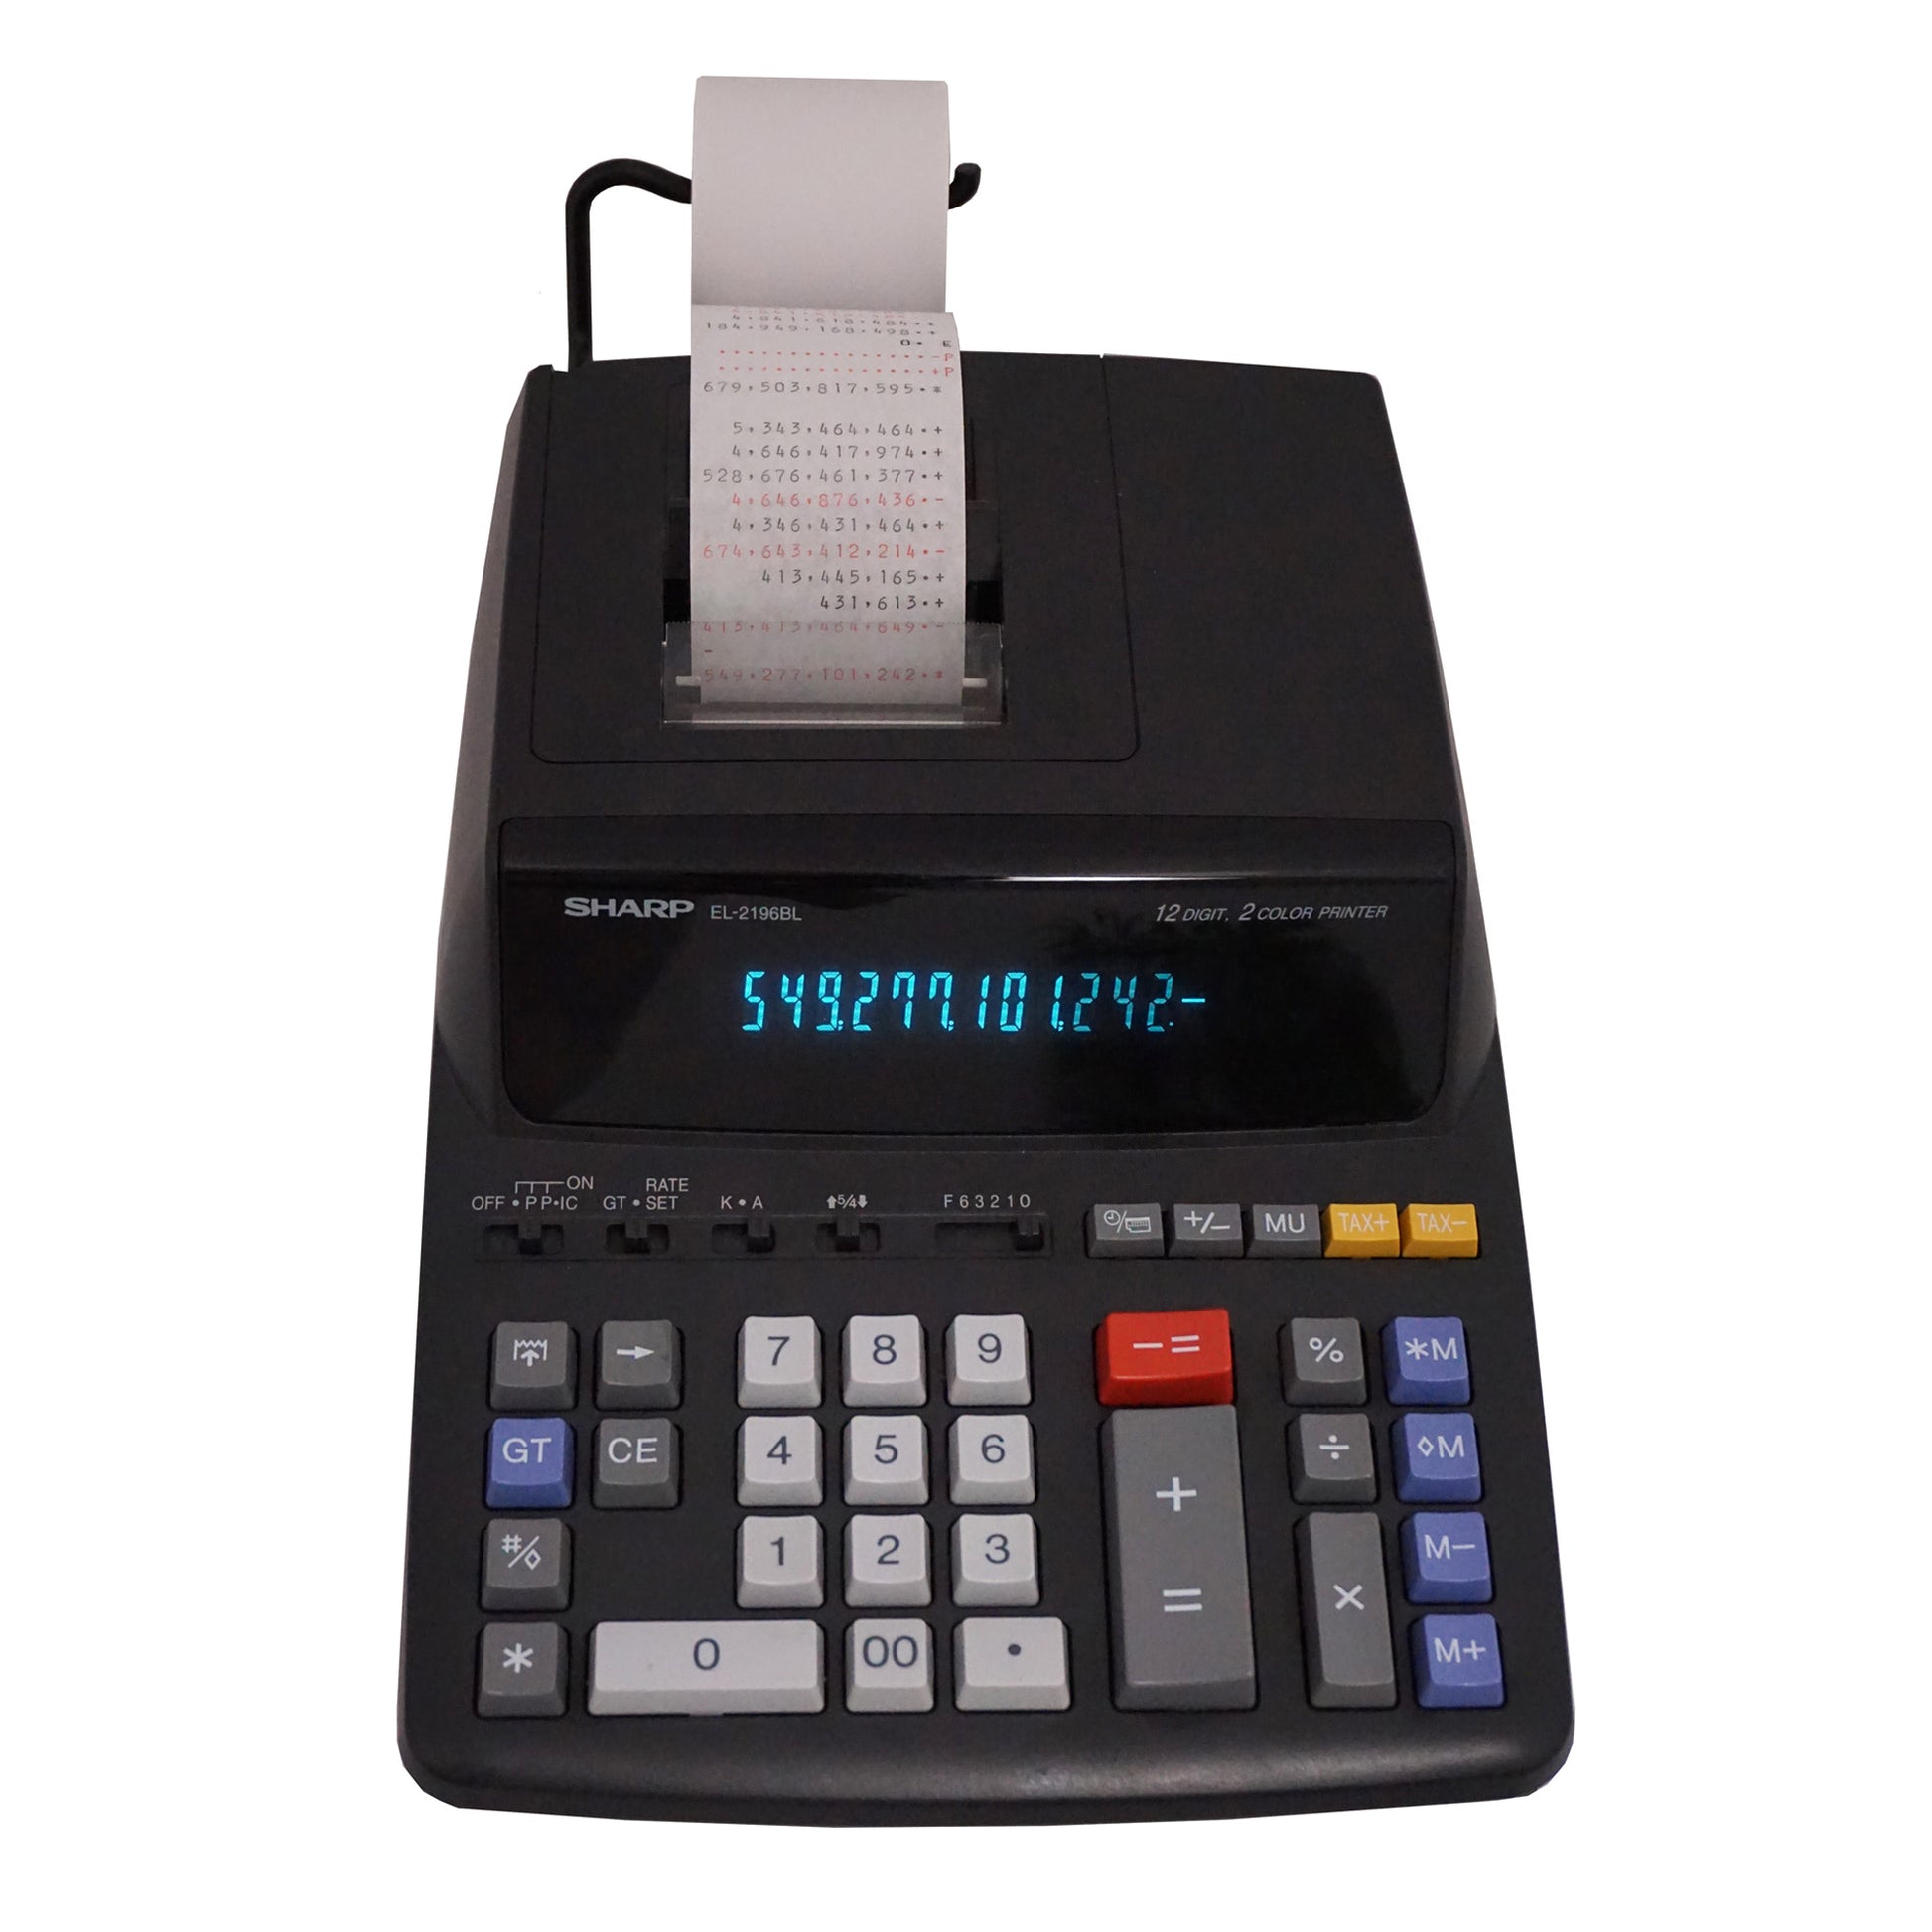 black printing calculator with extra large plus and minus keys and sculpted keys